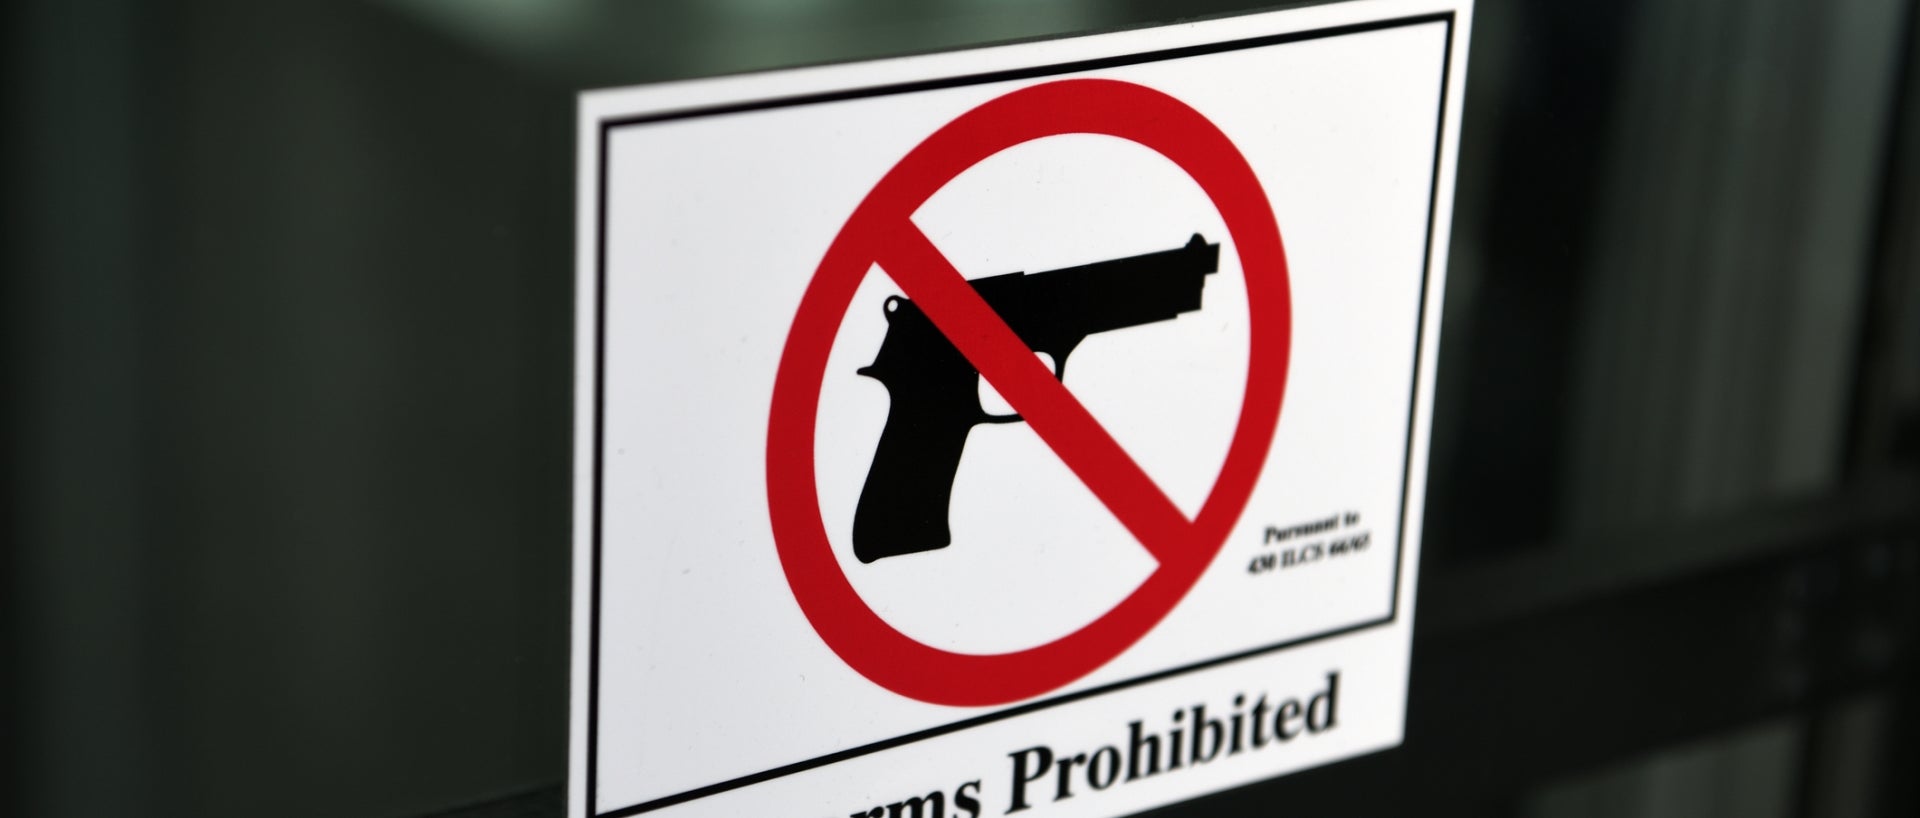 Sign of a handgun crossed out reading 'firearms prohibited'